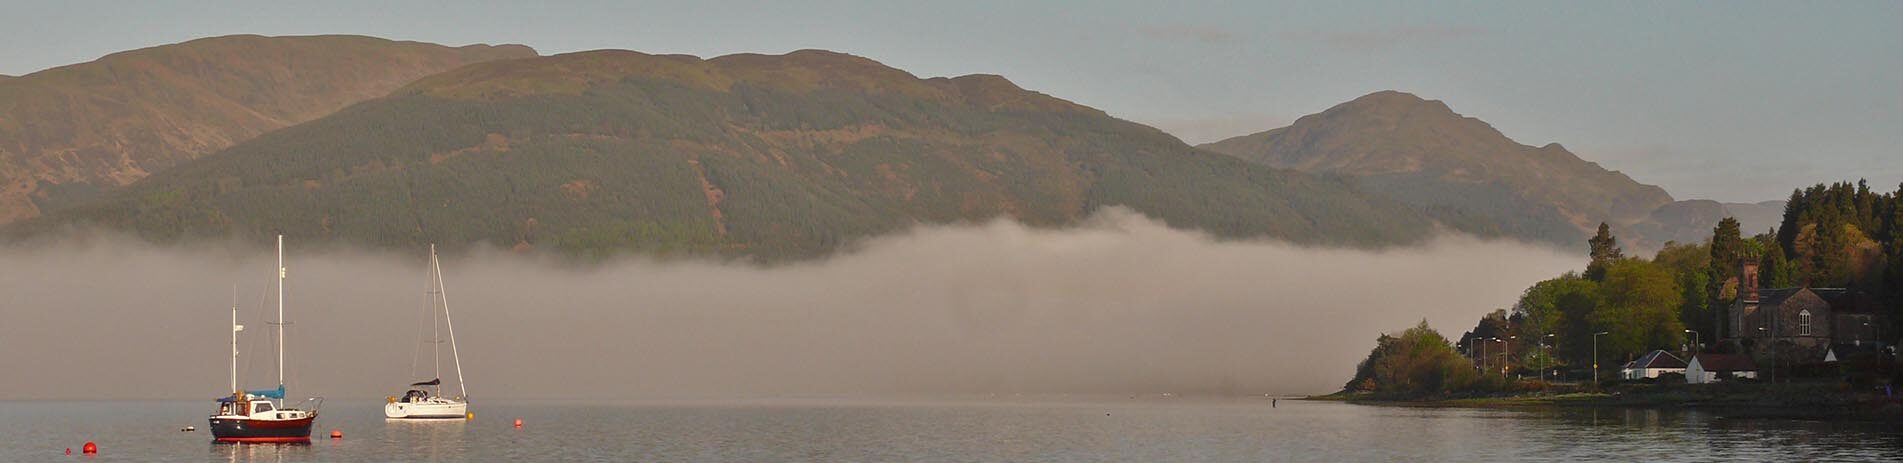 view-of-holy-loch-and-kilmun-village-and-shore-with-high-hills-in-the-distance